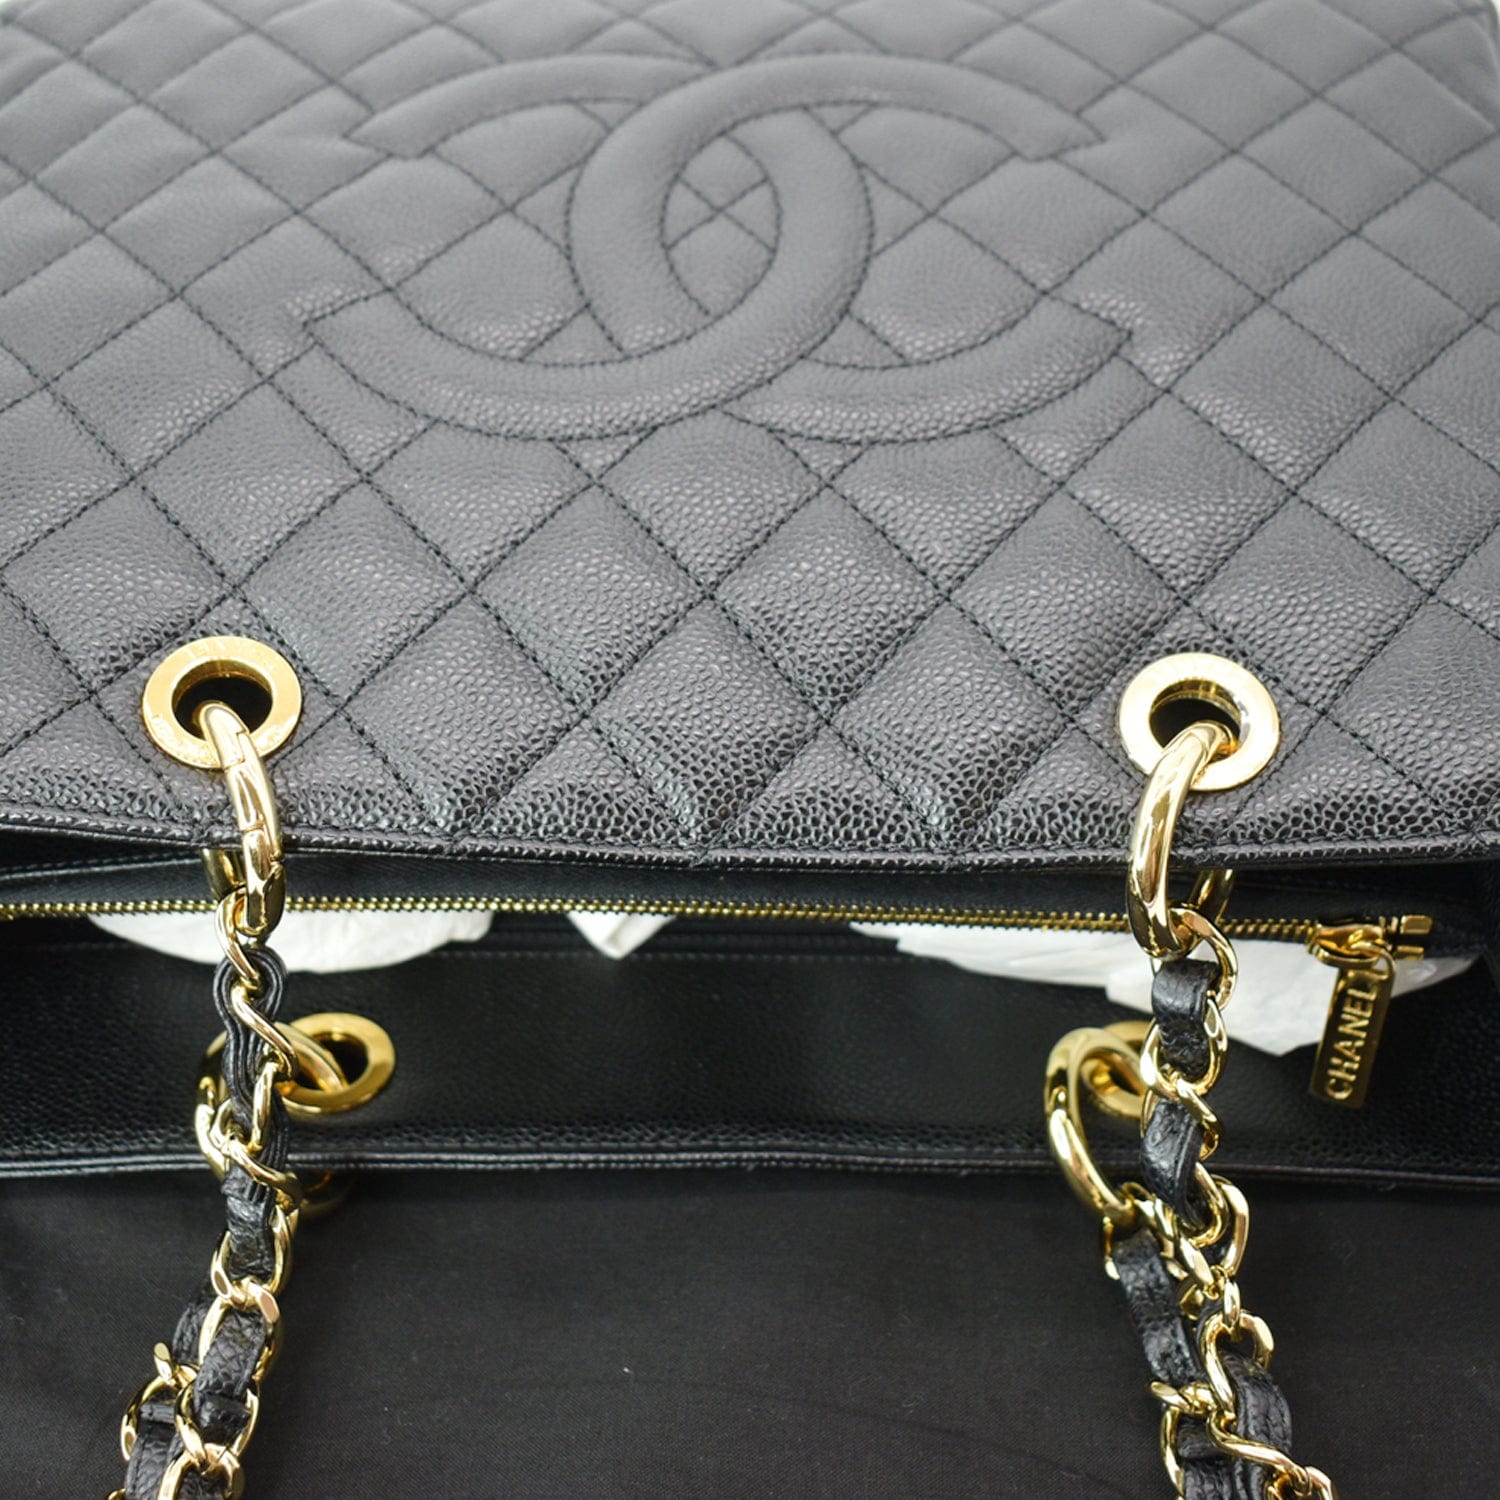 CHANEL. Small Shopper Tote Bag, Fall Collection, year 20…